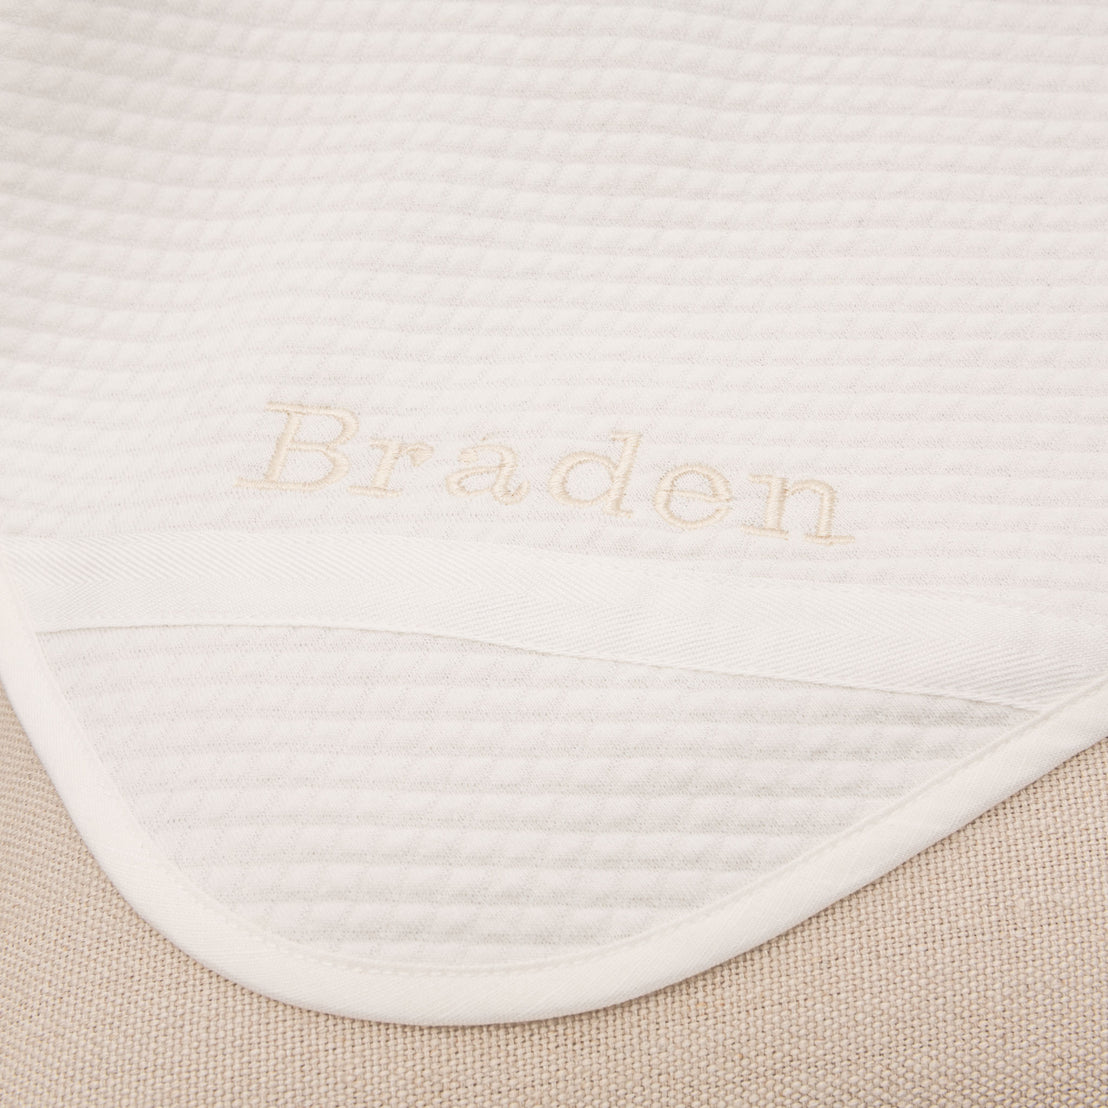 Flat lay photo of the Braden Personalized Blanket made from ivory textured cotton with an ivory grosgrain ribbon woven on the corner. The name "Braden" is embroidered on the corner of the blanket.